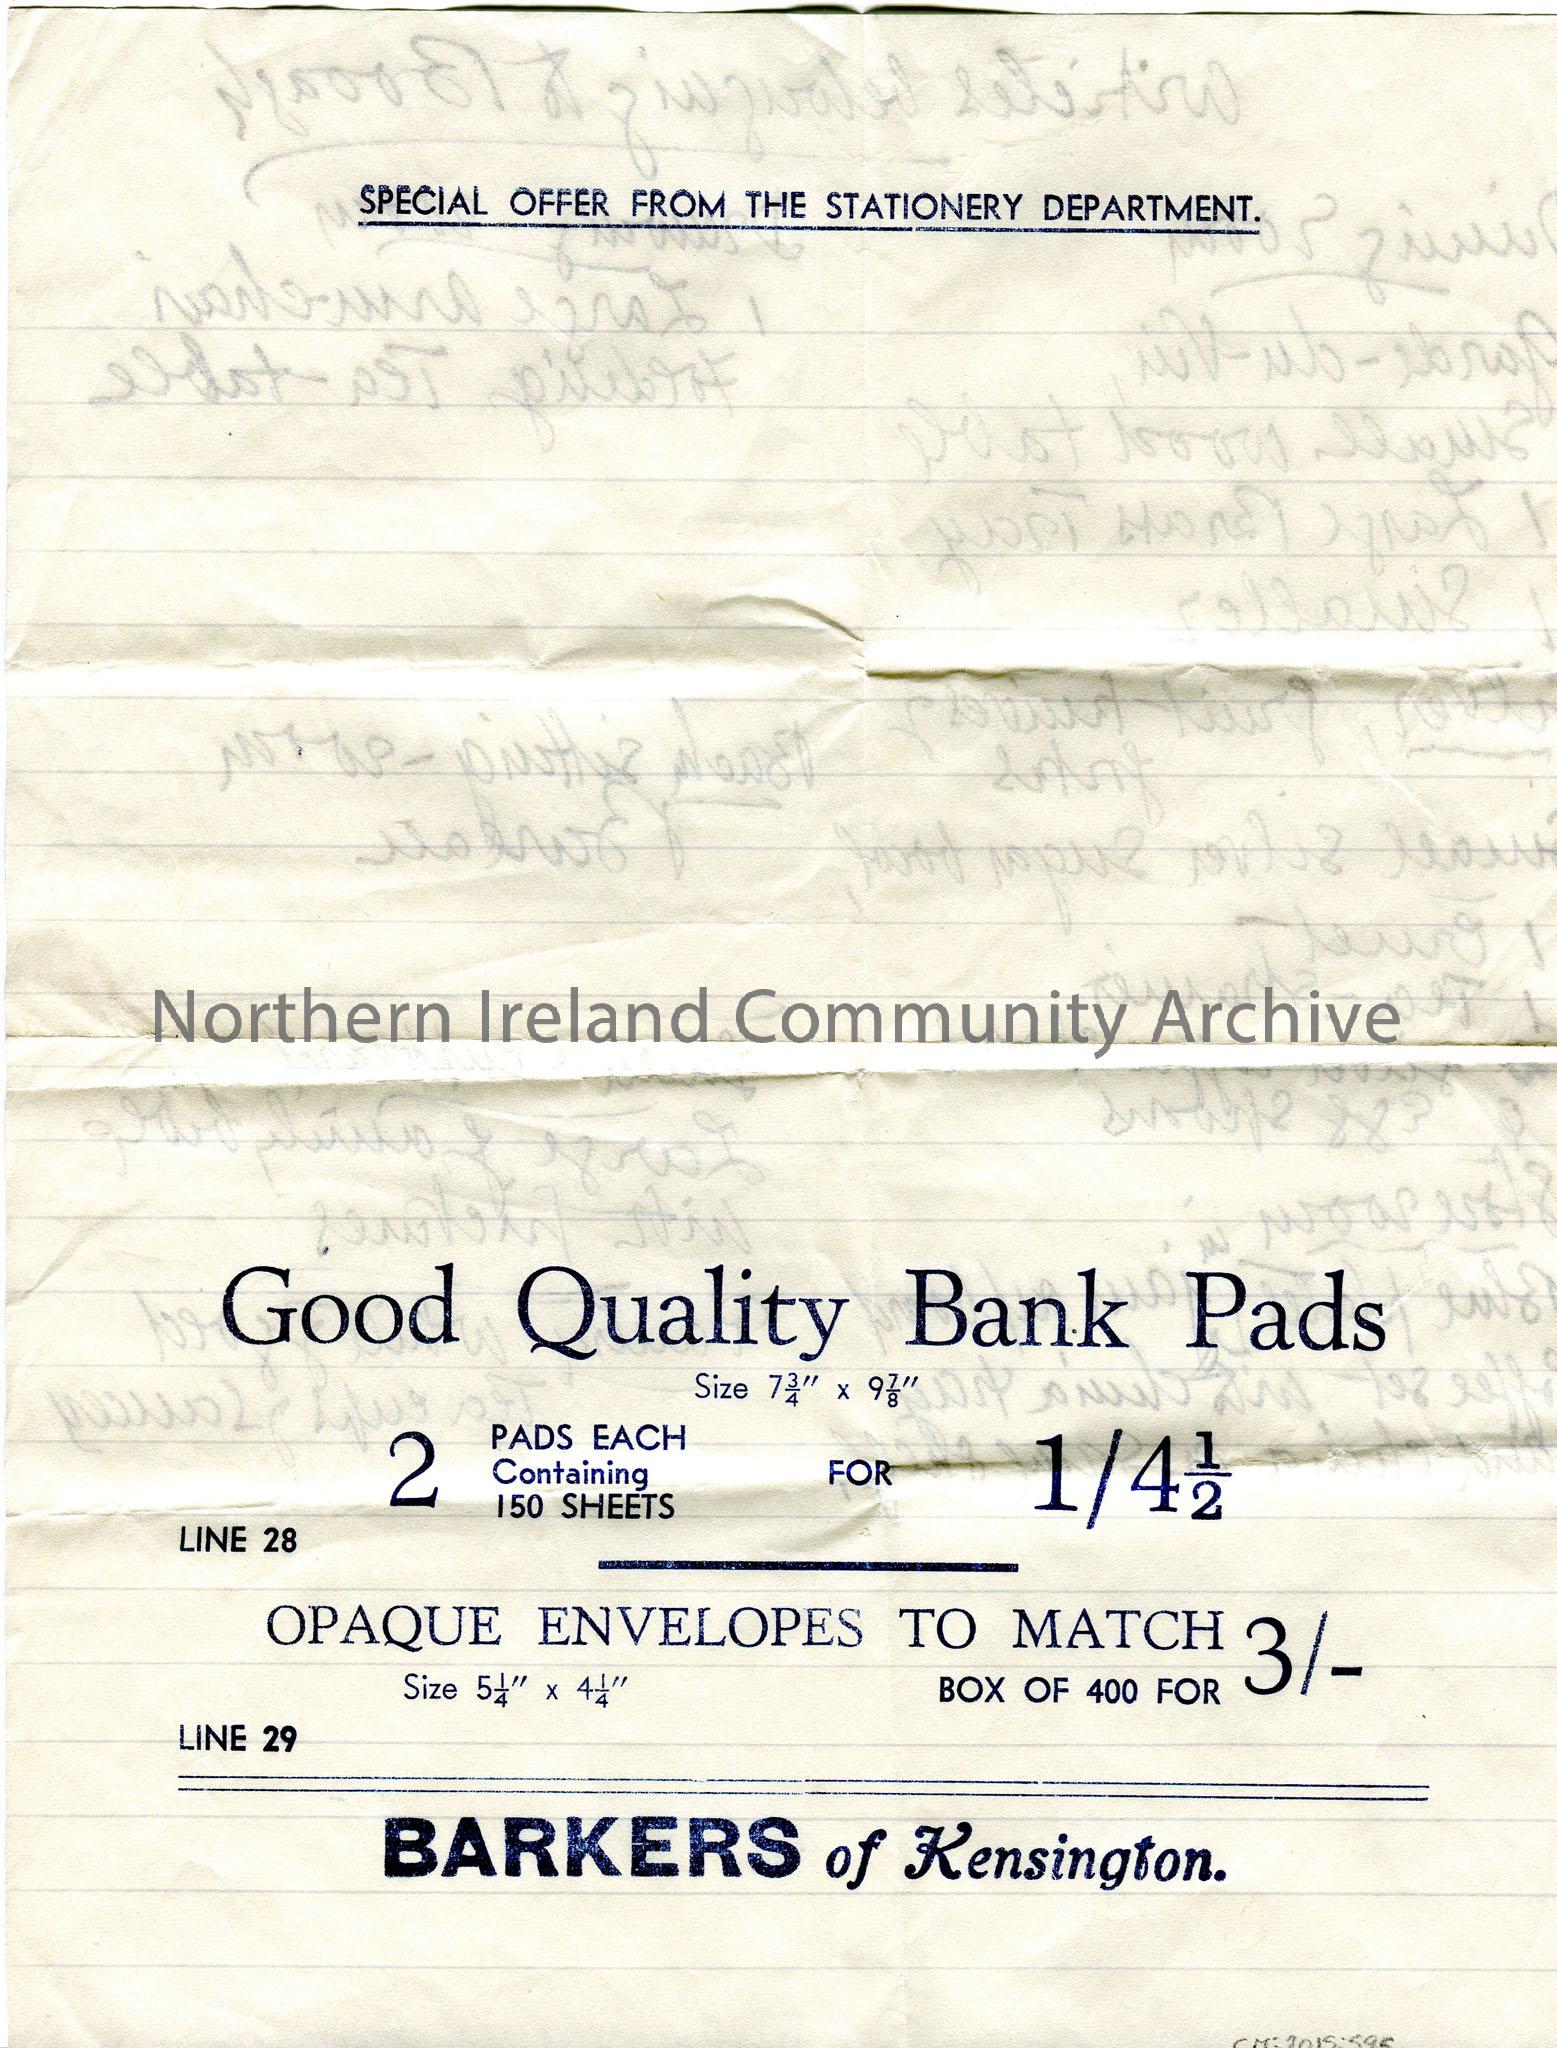 Handwritten list in ink of items ‘articles belonging to Bovagh’, written on reverse of lined page carrying advert for ‘Quality Bank Pads’. Furniture a… – img149b